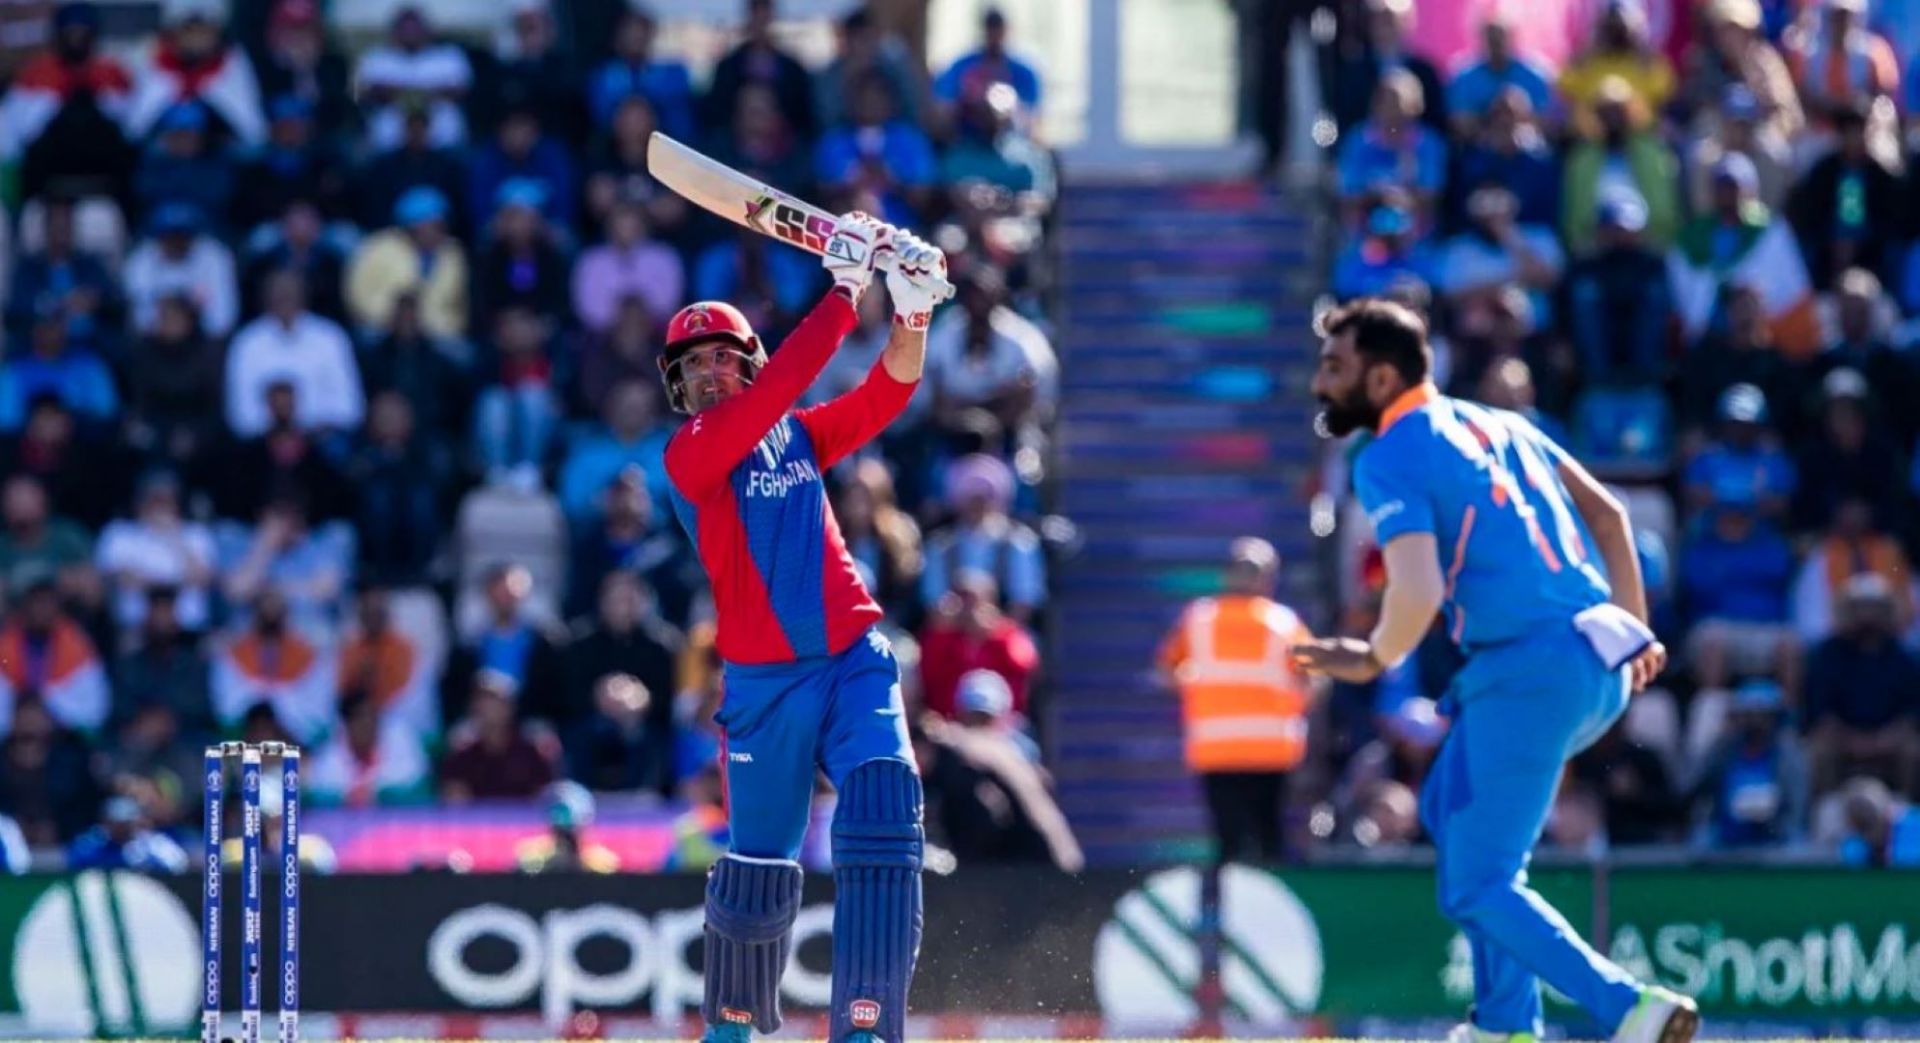 Mohammad Nabi took Afghanistan within inches of a monumental upset.